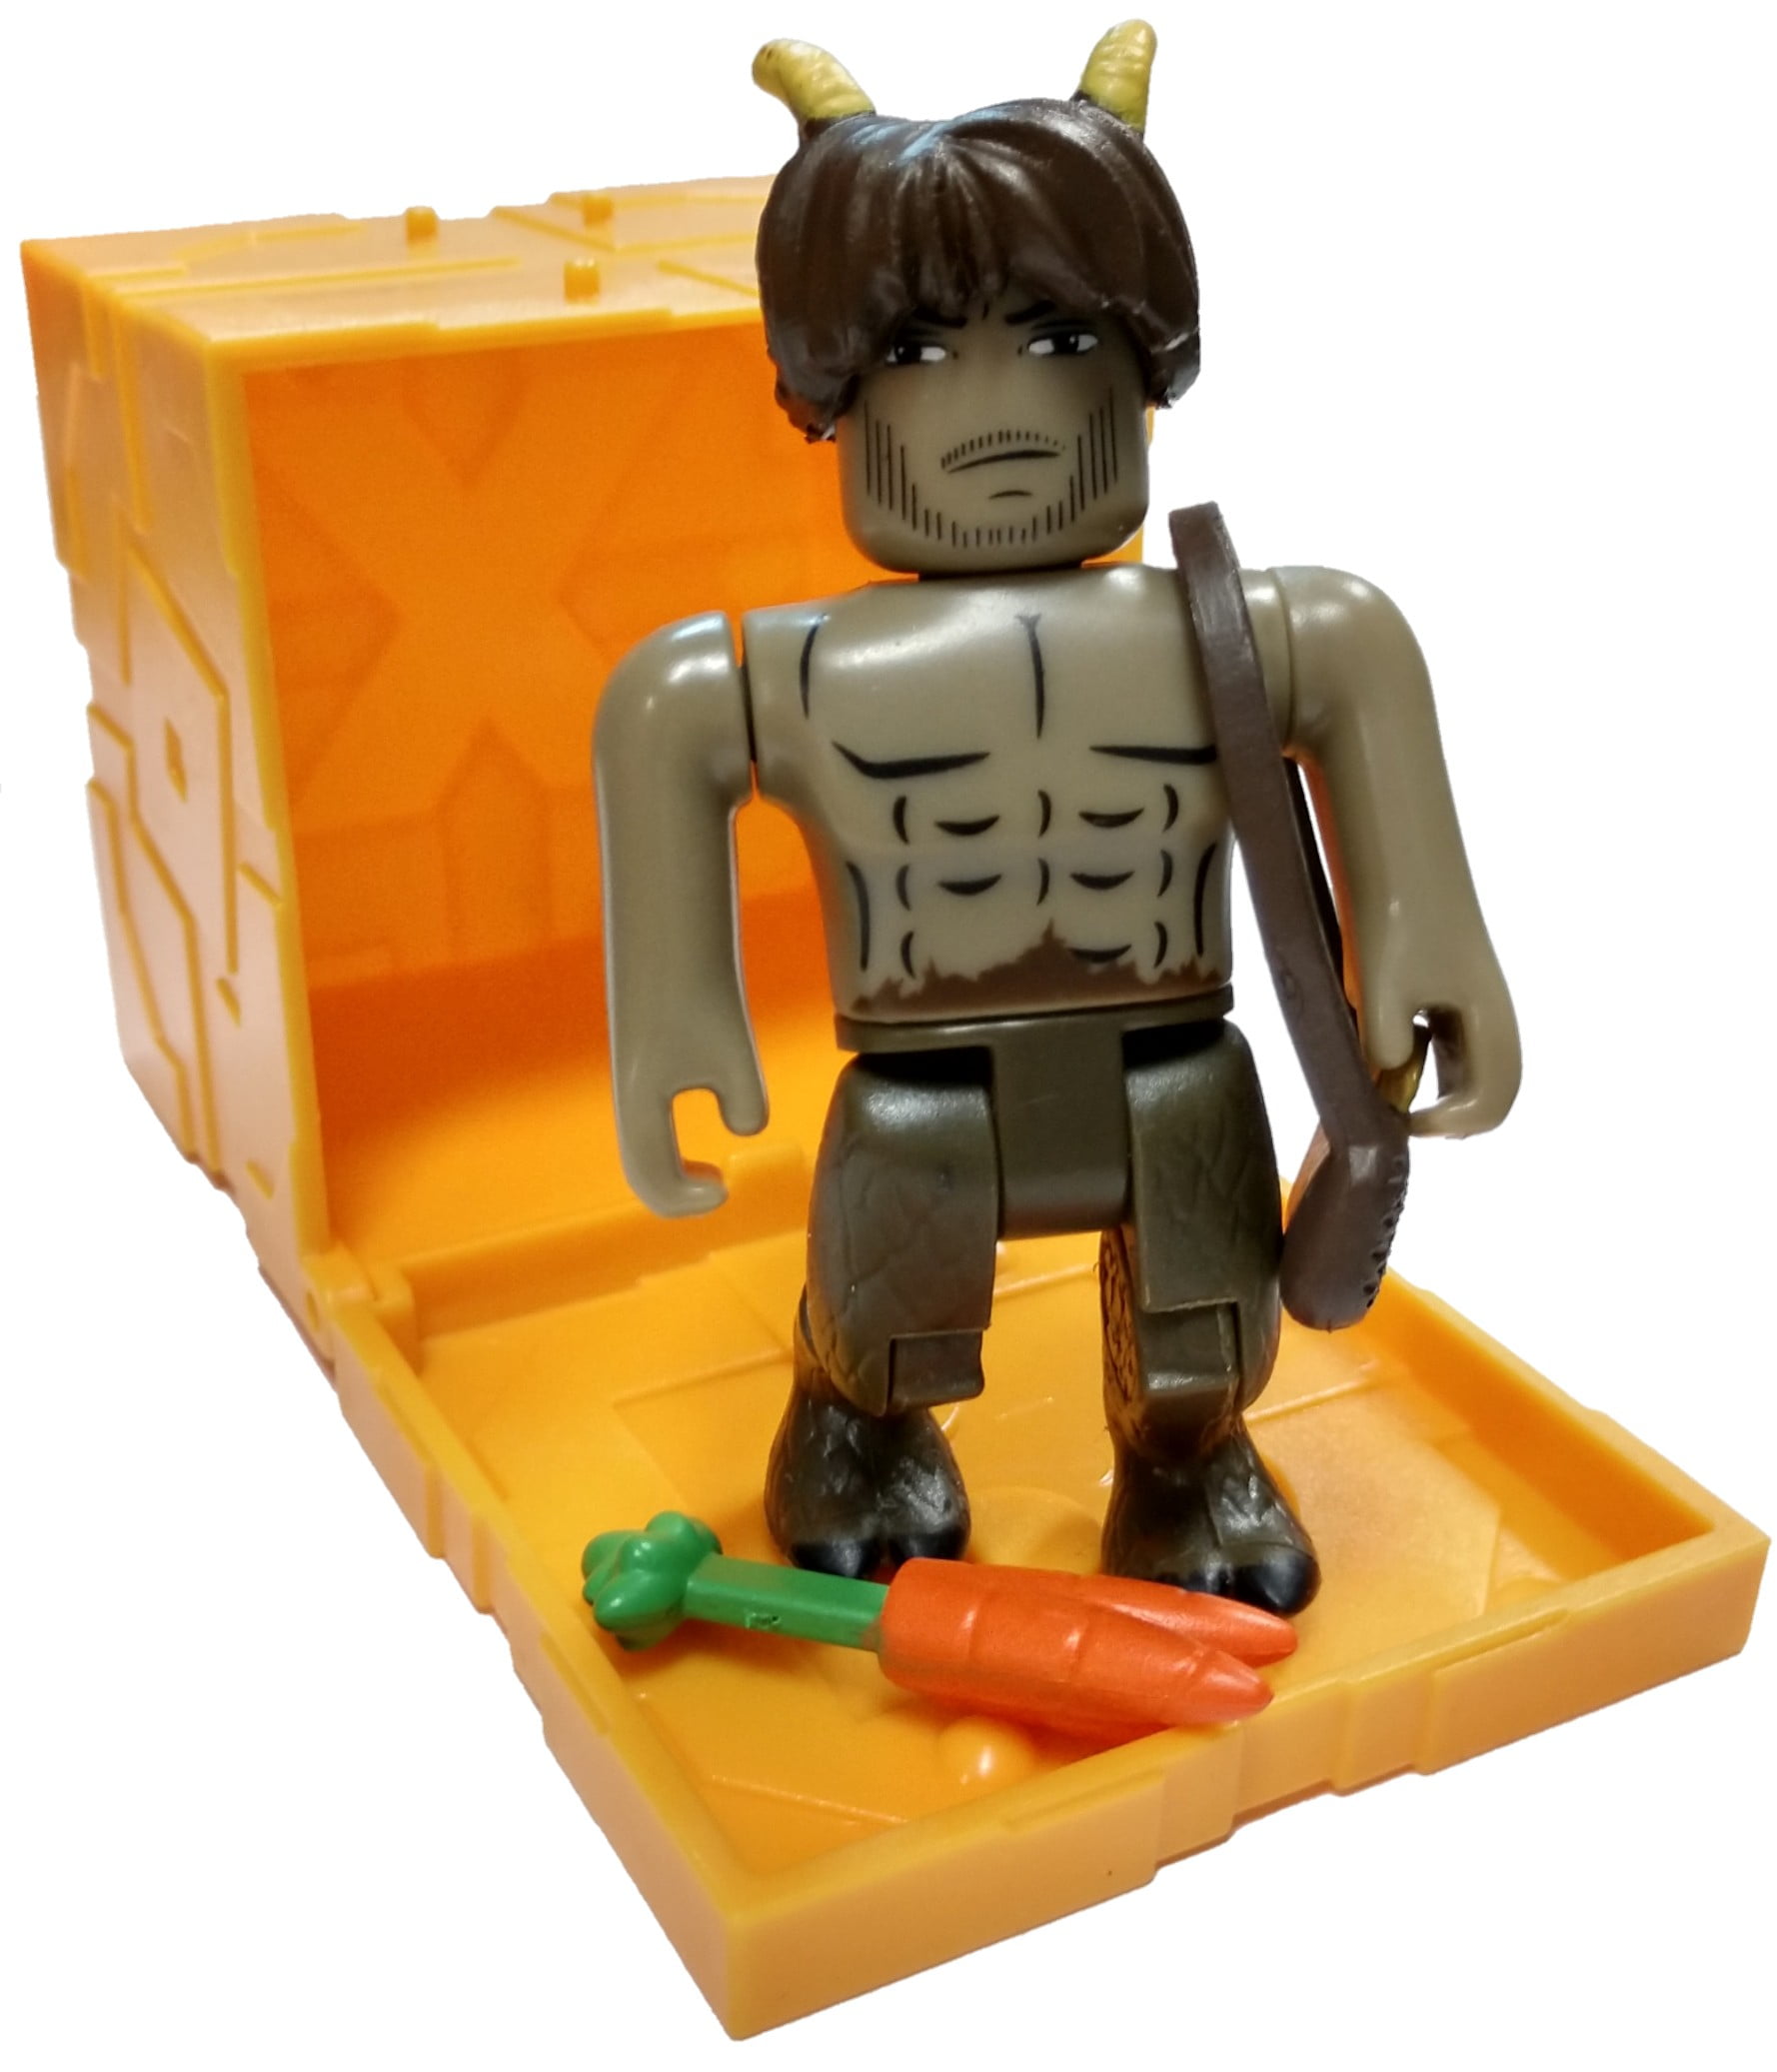 Roblox Series 5 Neverland Lagoon Draseus Mini Figure With Gold Cube And Online Code No Packaging Walmart Com Walmart Com - details about roblox neverland lagoon 4 figure pack virtual item code brand new